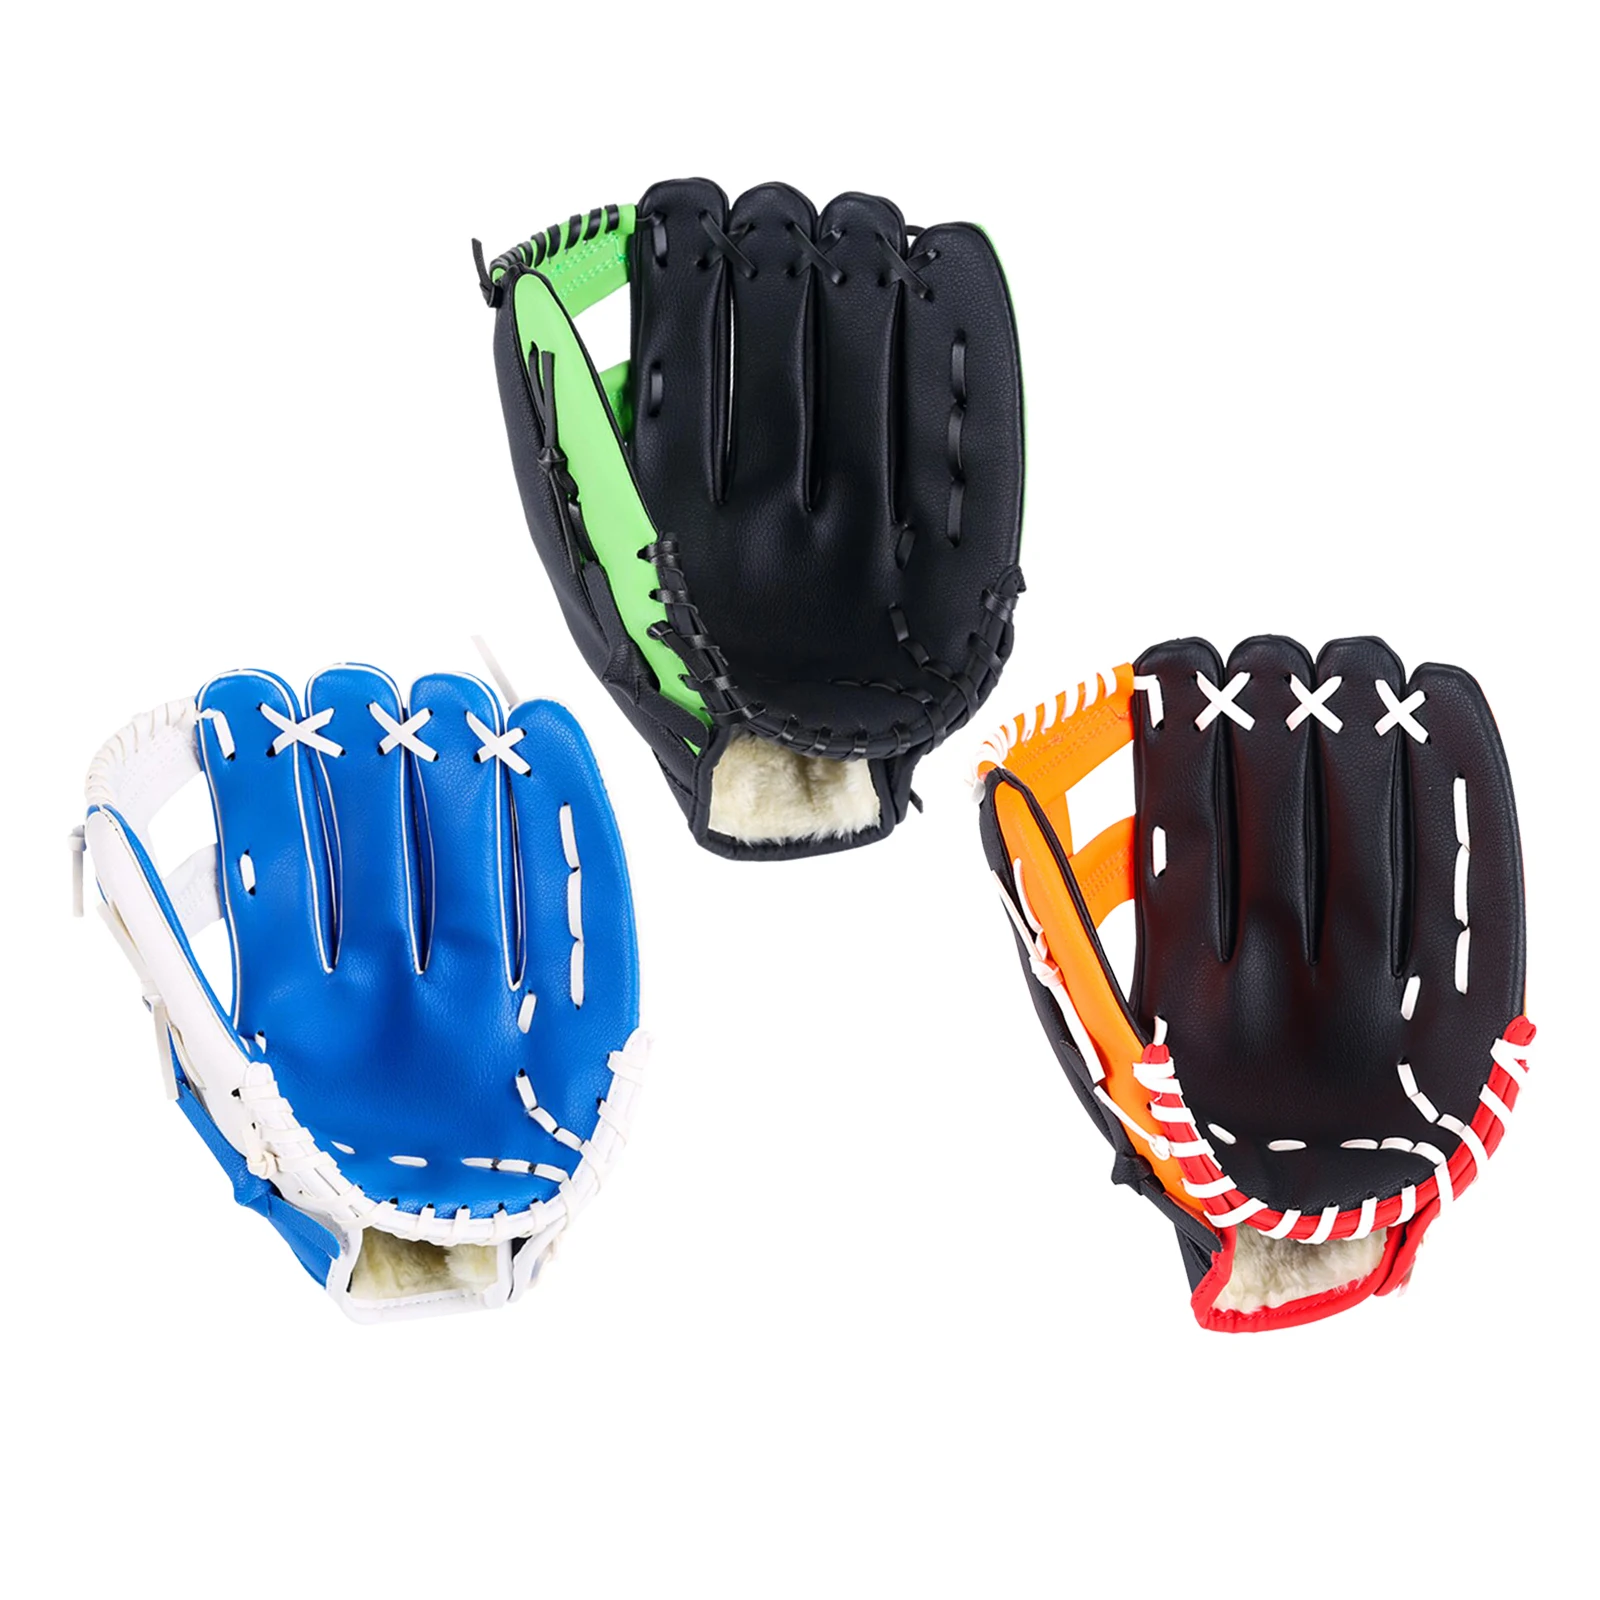 Adjustable Premium Baseball Gloves Soft Solid Leather Softball Teeball Glove for Batting Glove Ready to Play with Ball Glove